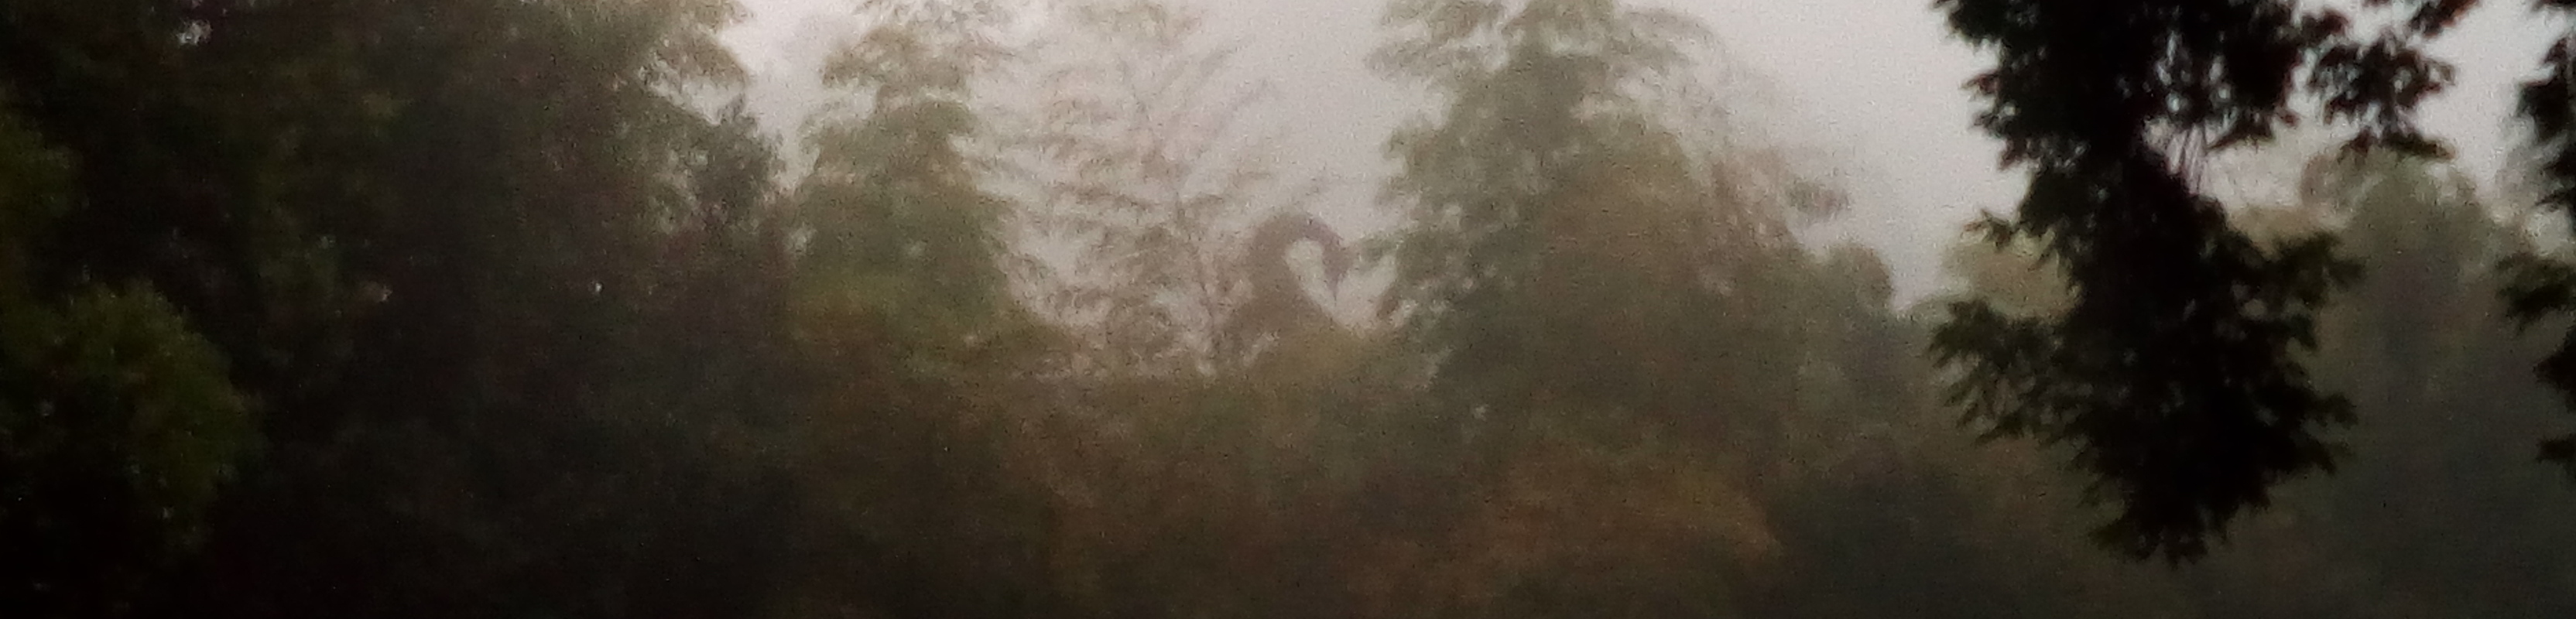 Mysterious curled arch through haze in forest